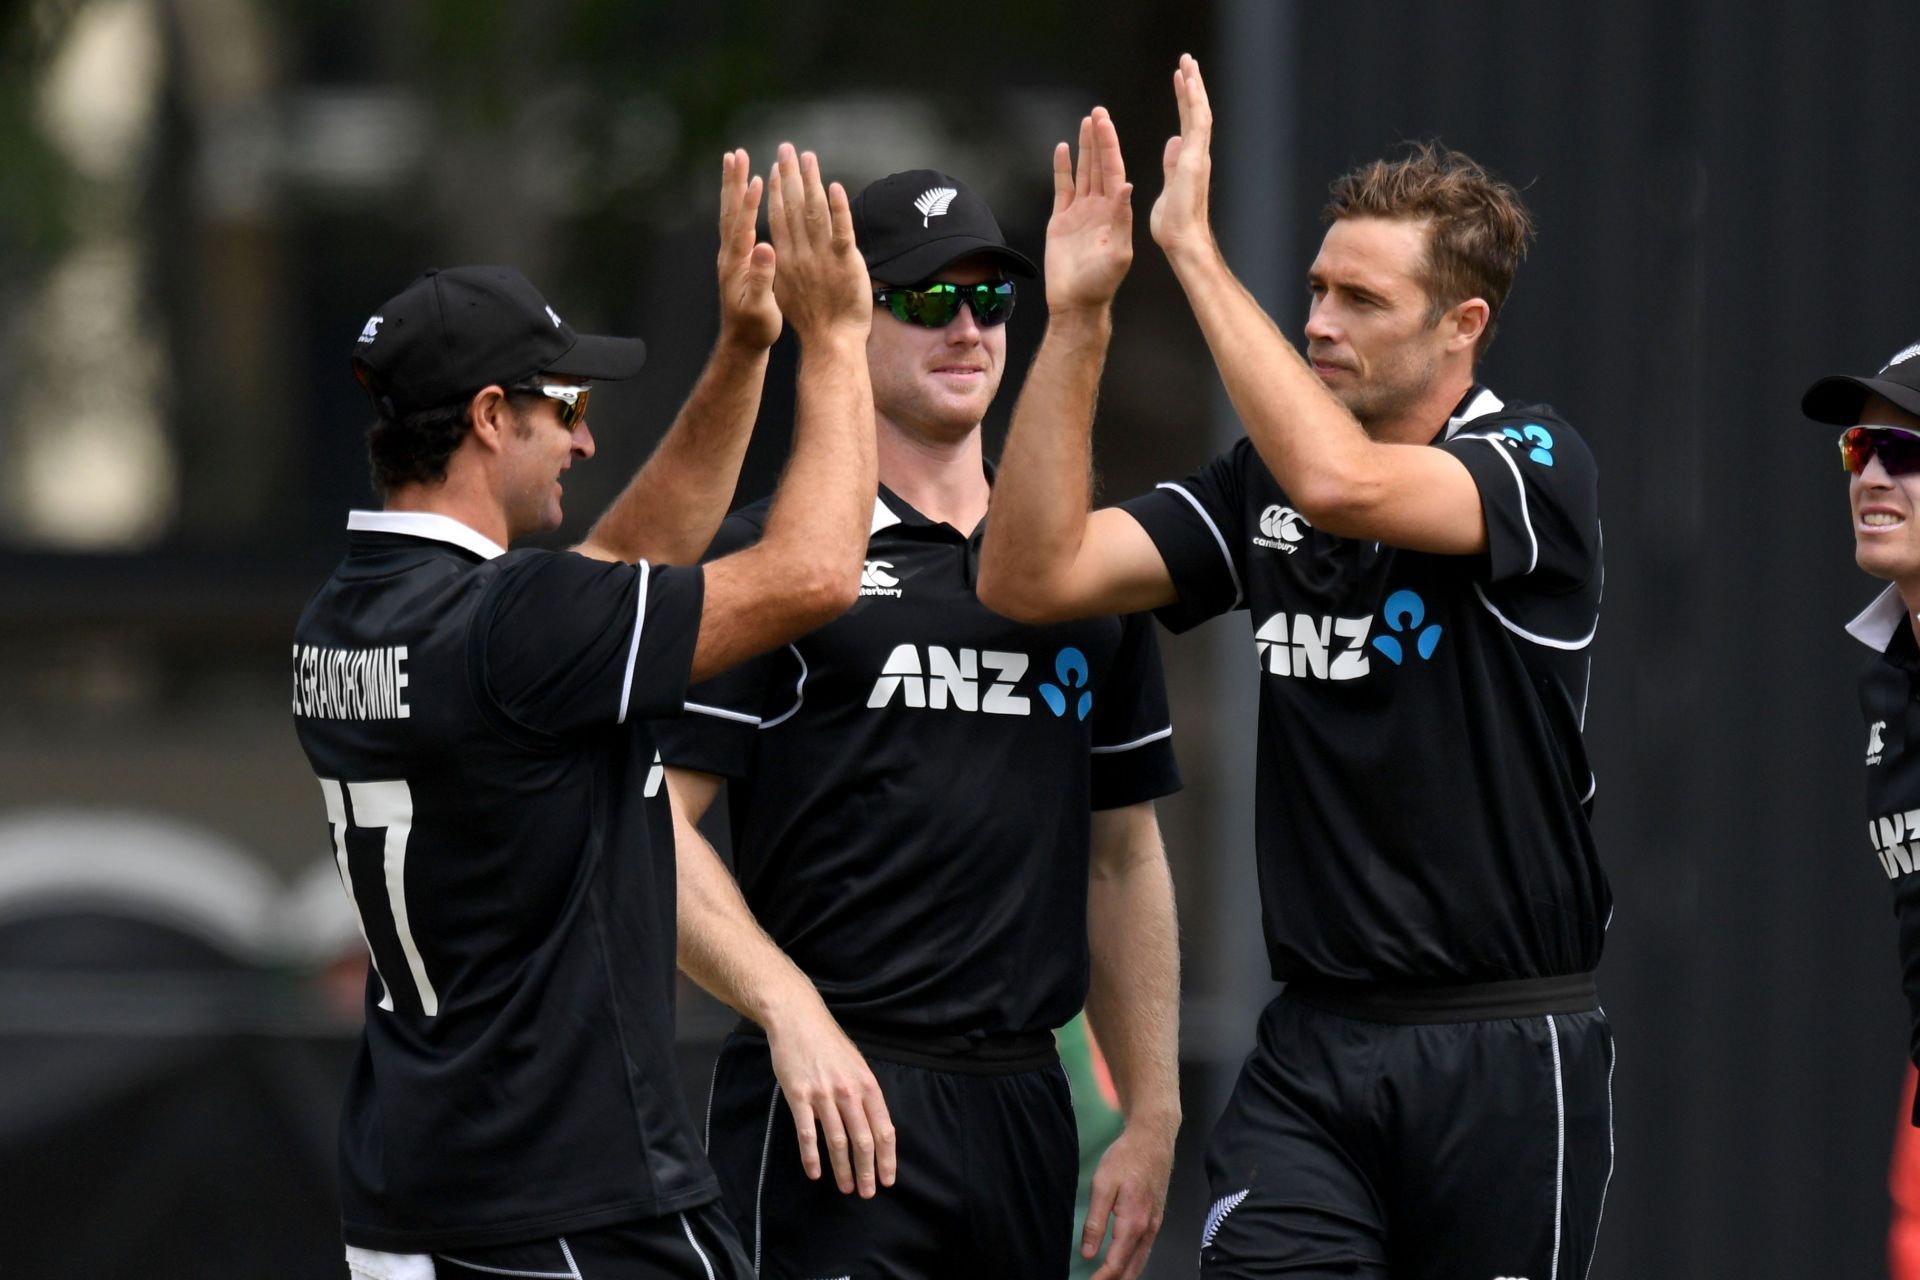 Tim Southee celebrates a wicket.(Credits: Twitter)